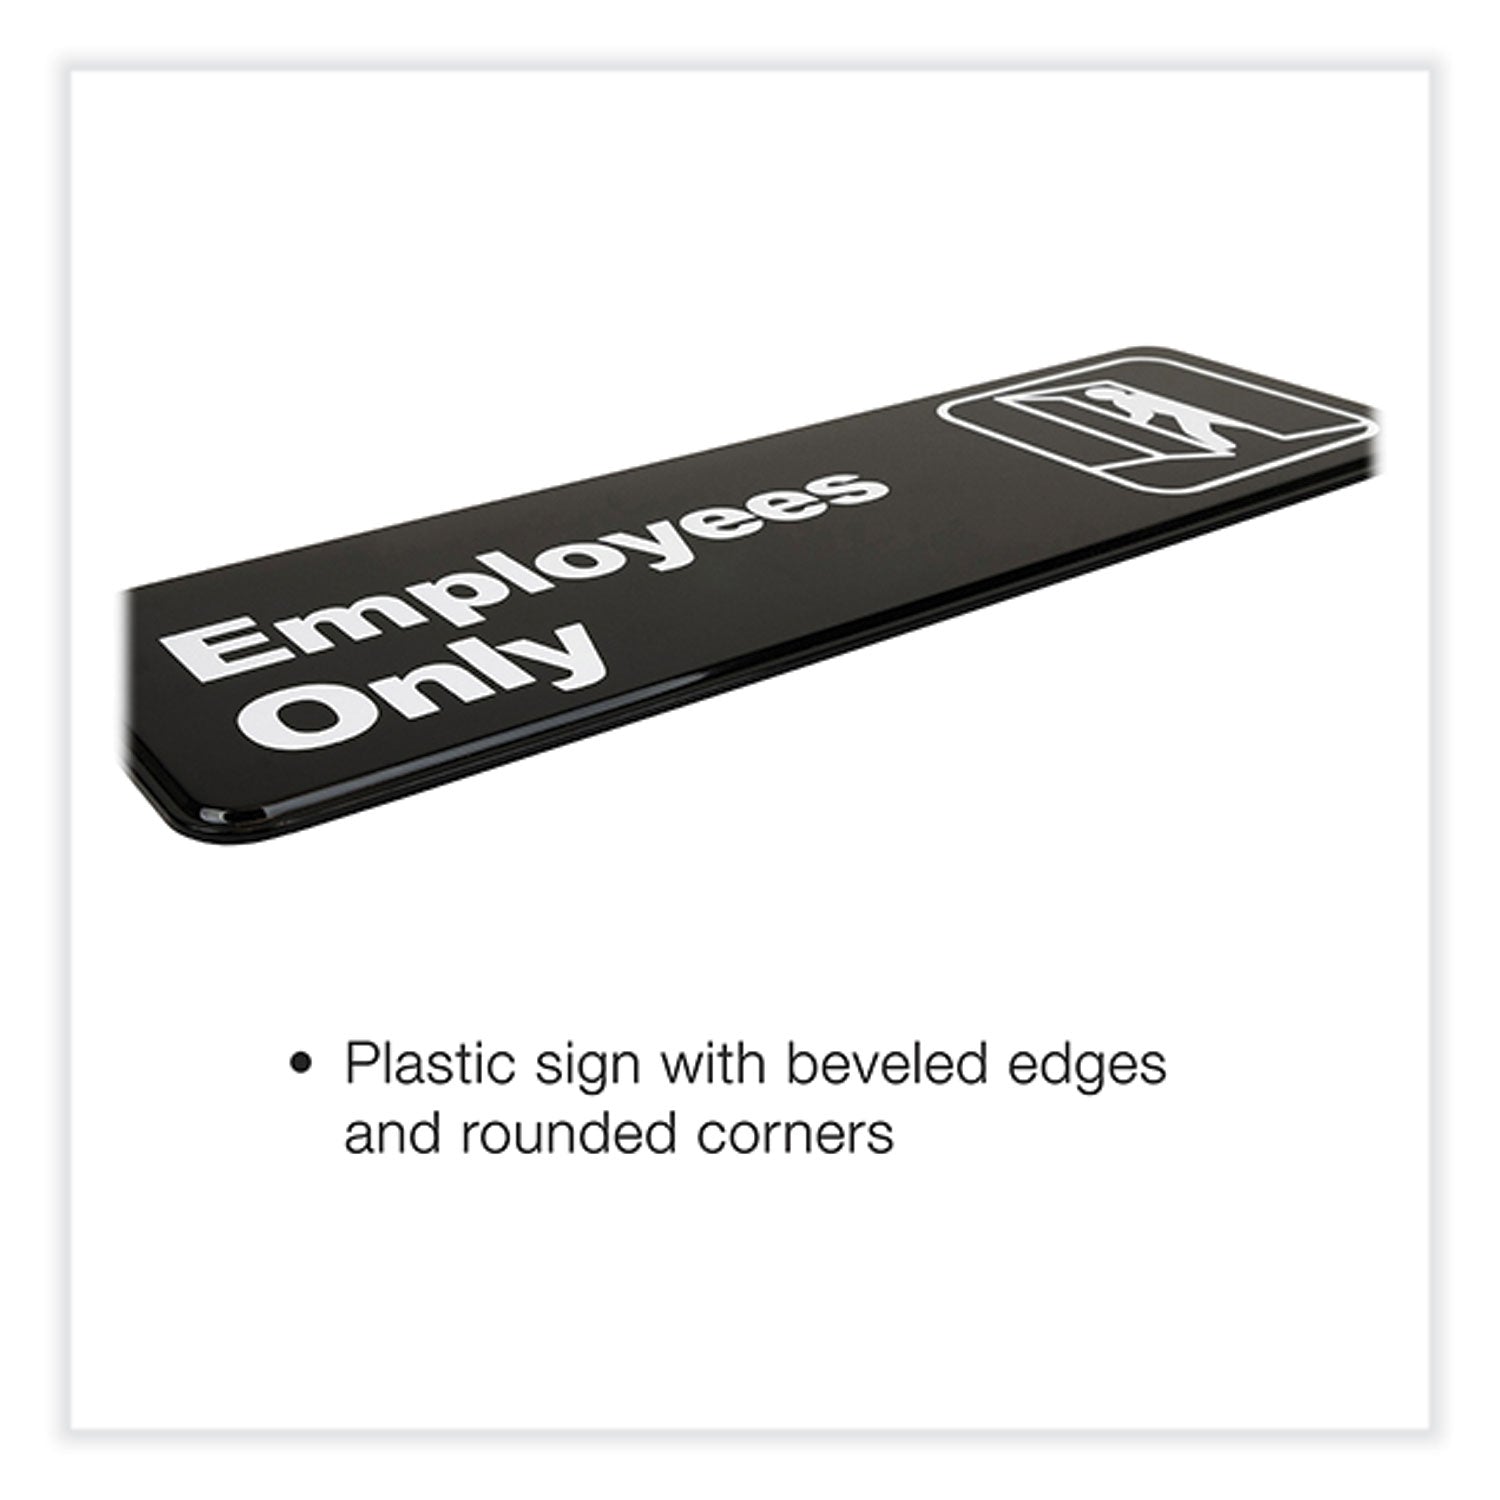 employees-only-indoor-outdoor-wall-sign-9-x-3-black-face-white-graphics-3-pack_exohd0050s - 3